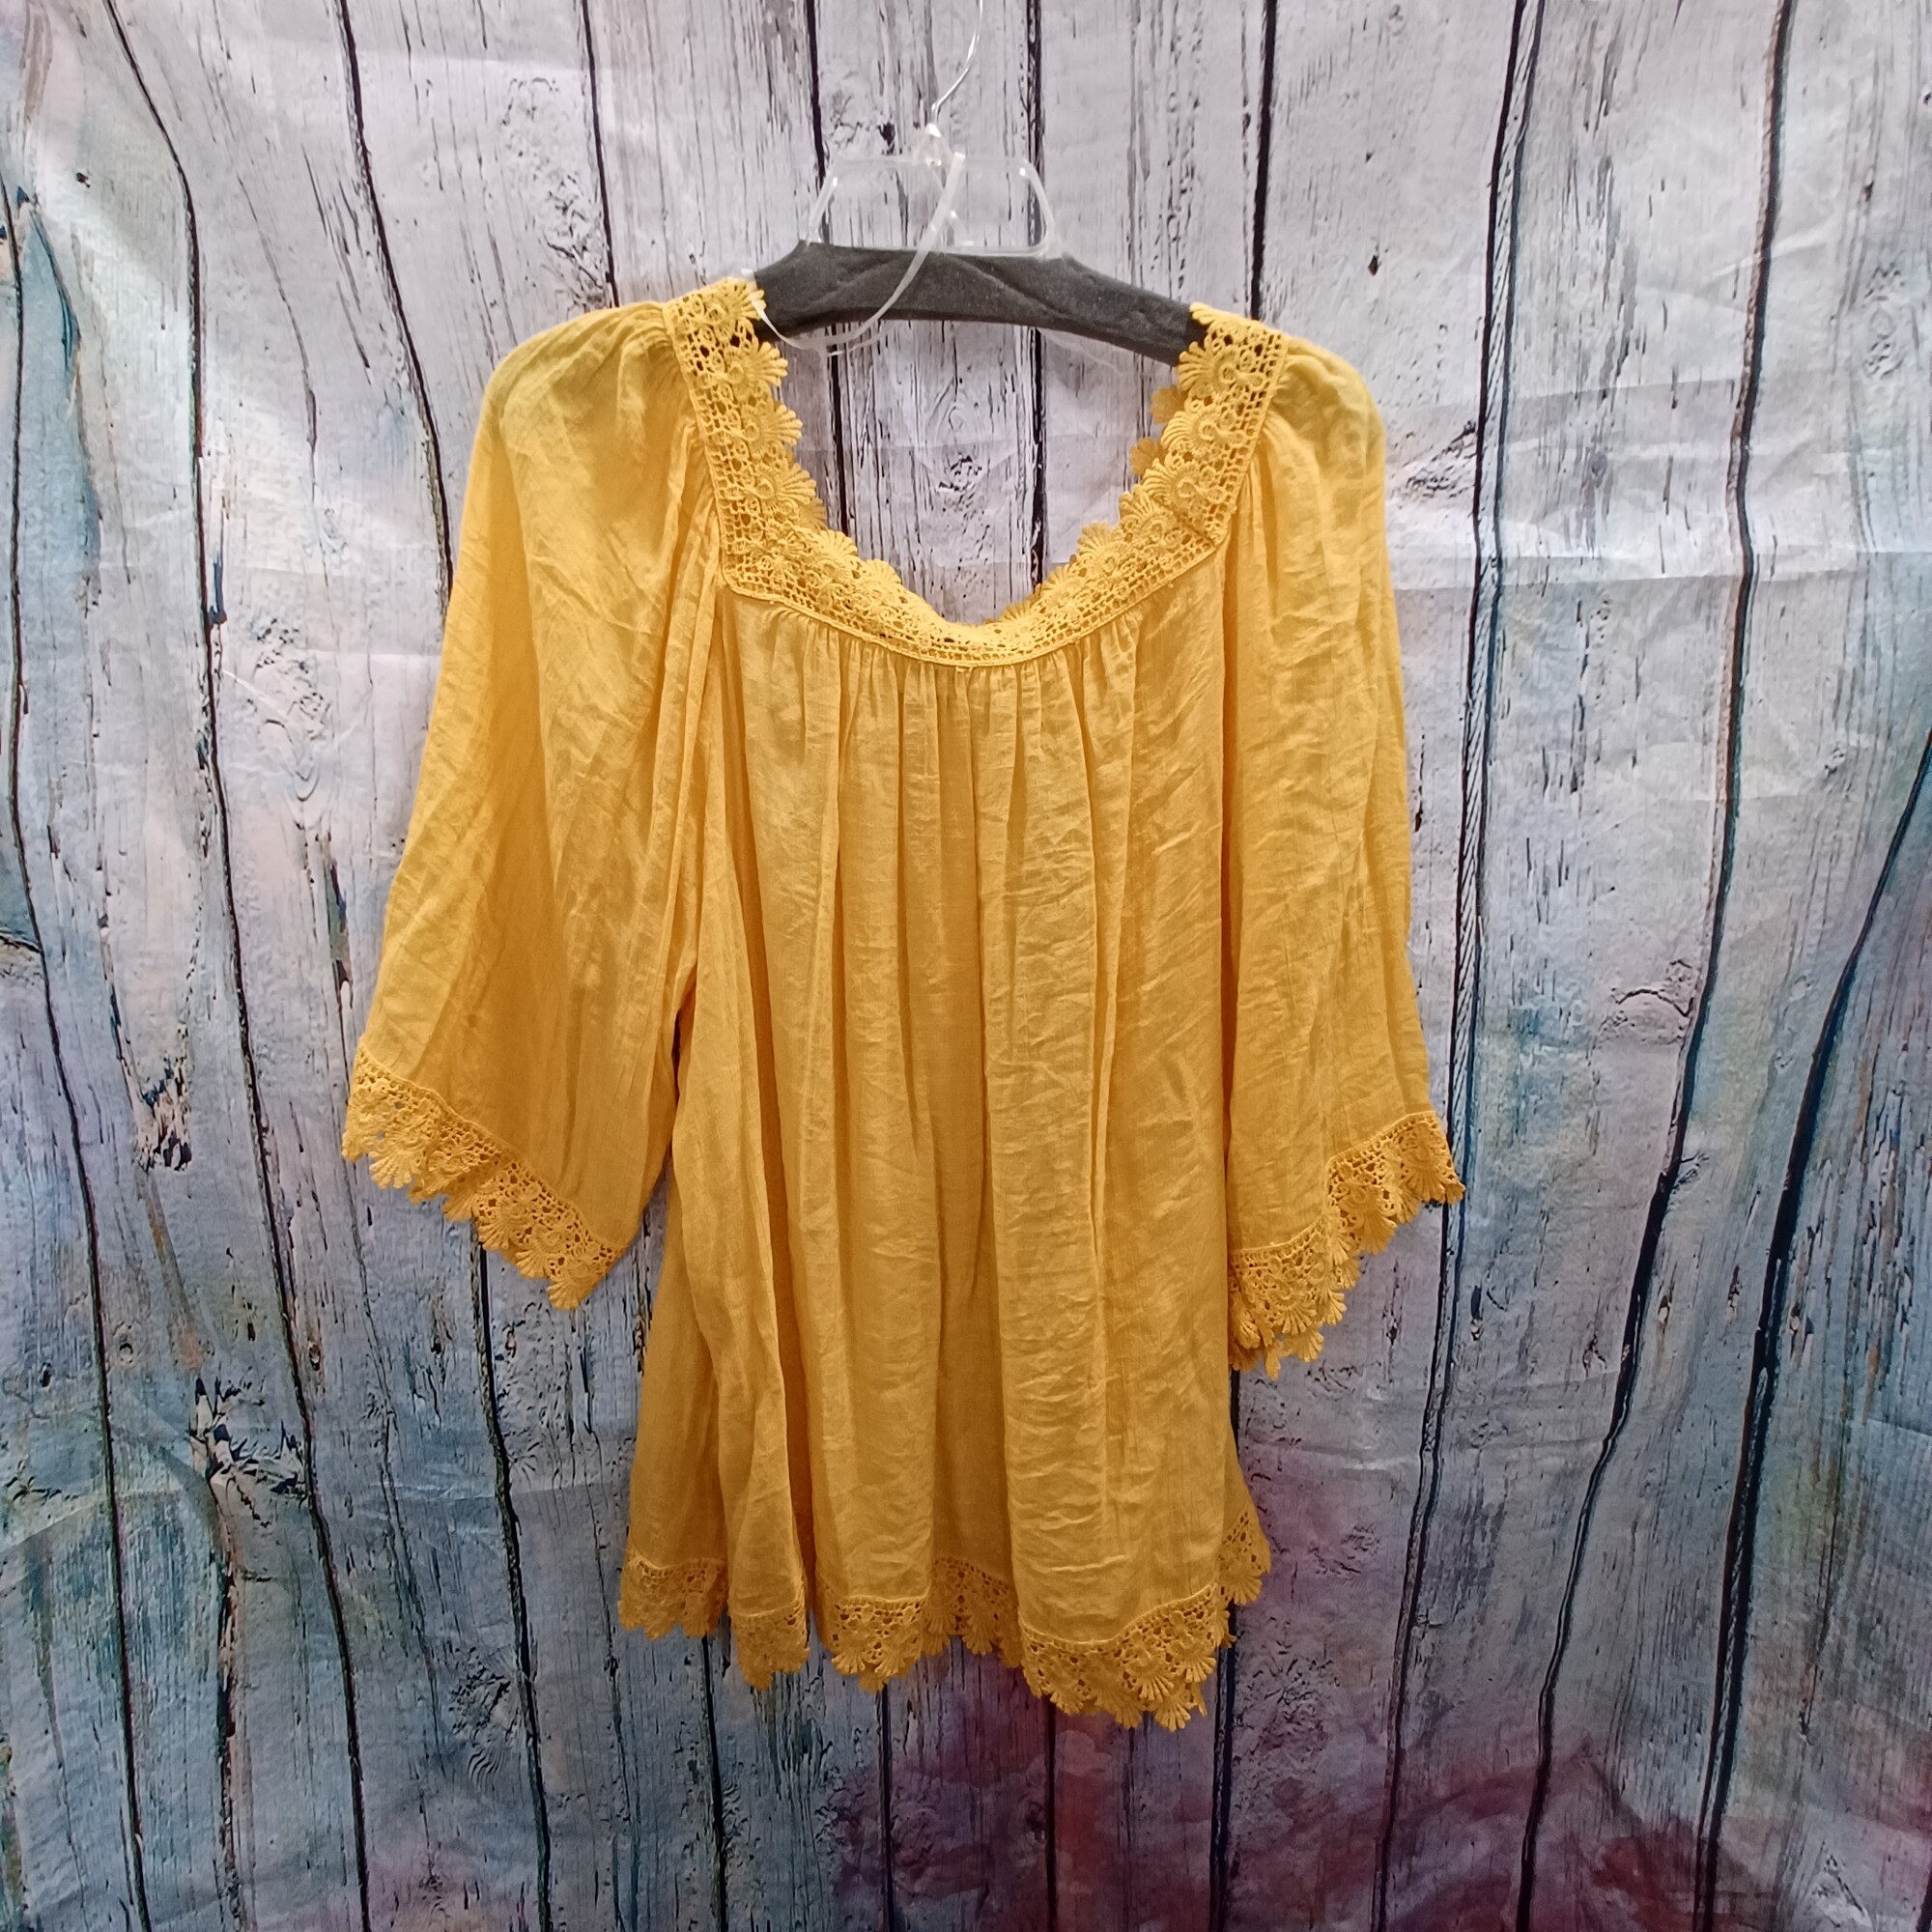 Super cute flowey blouse in goldenrod yellow with adorable lacing on the neckline, sleeve cuffs and waist